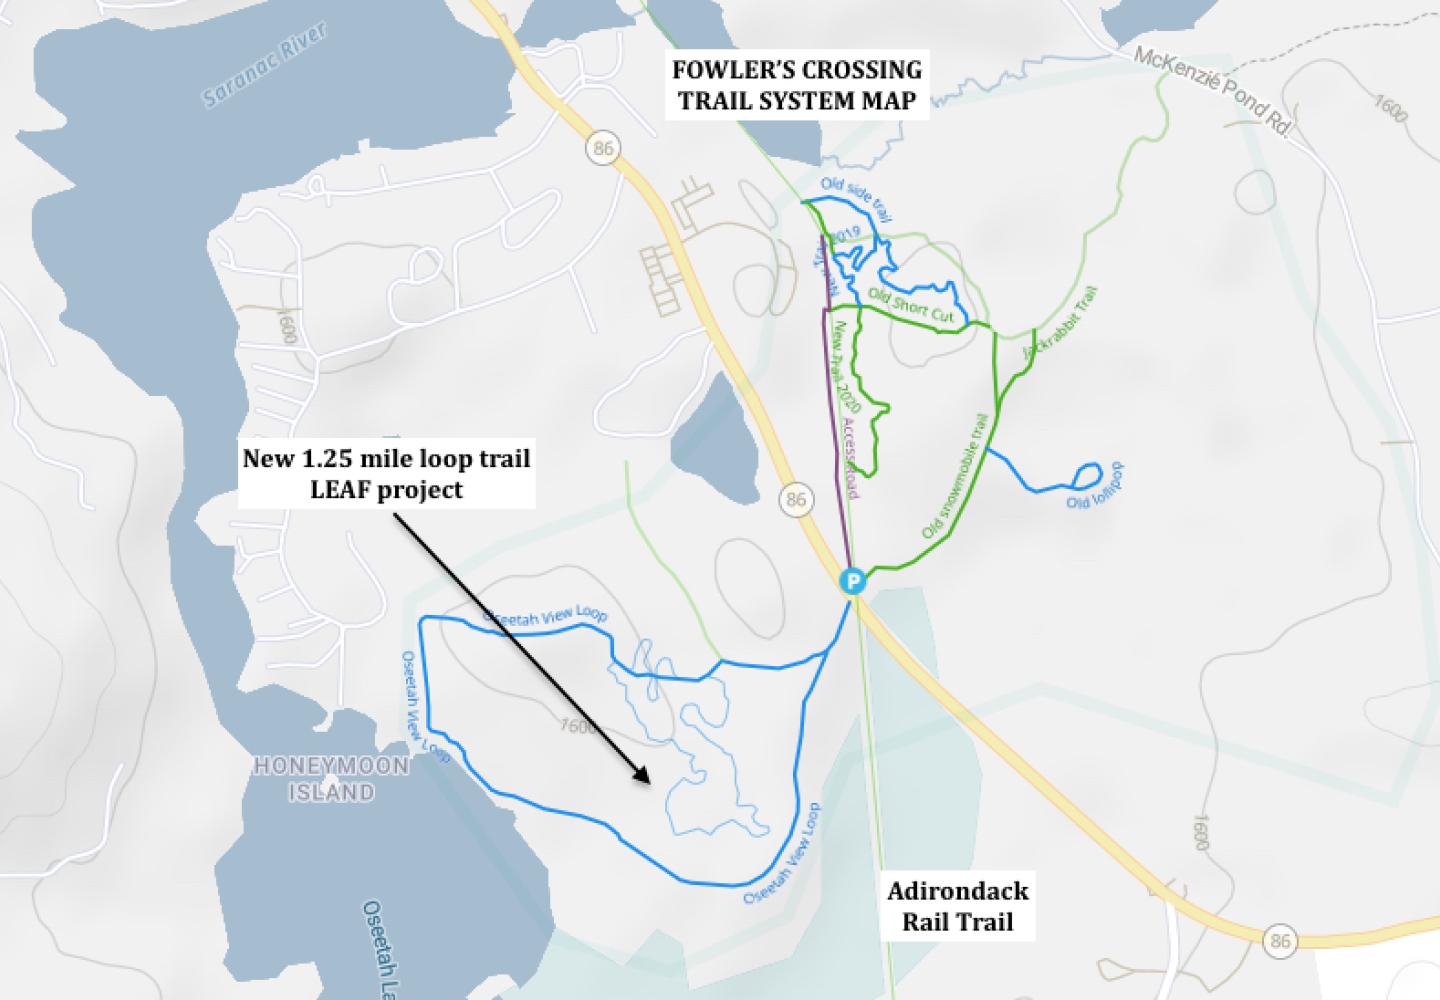 BETA’s new trail at Fowler’s Crossing is shown as a faint blue line inside the dark blue lines on the south side of Route 86. (Map courtesy of BETA)